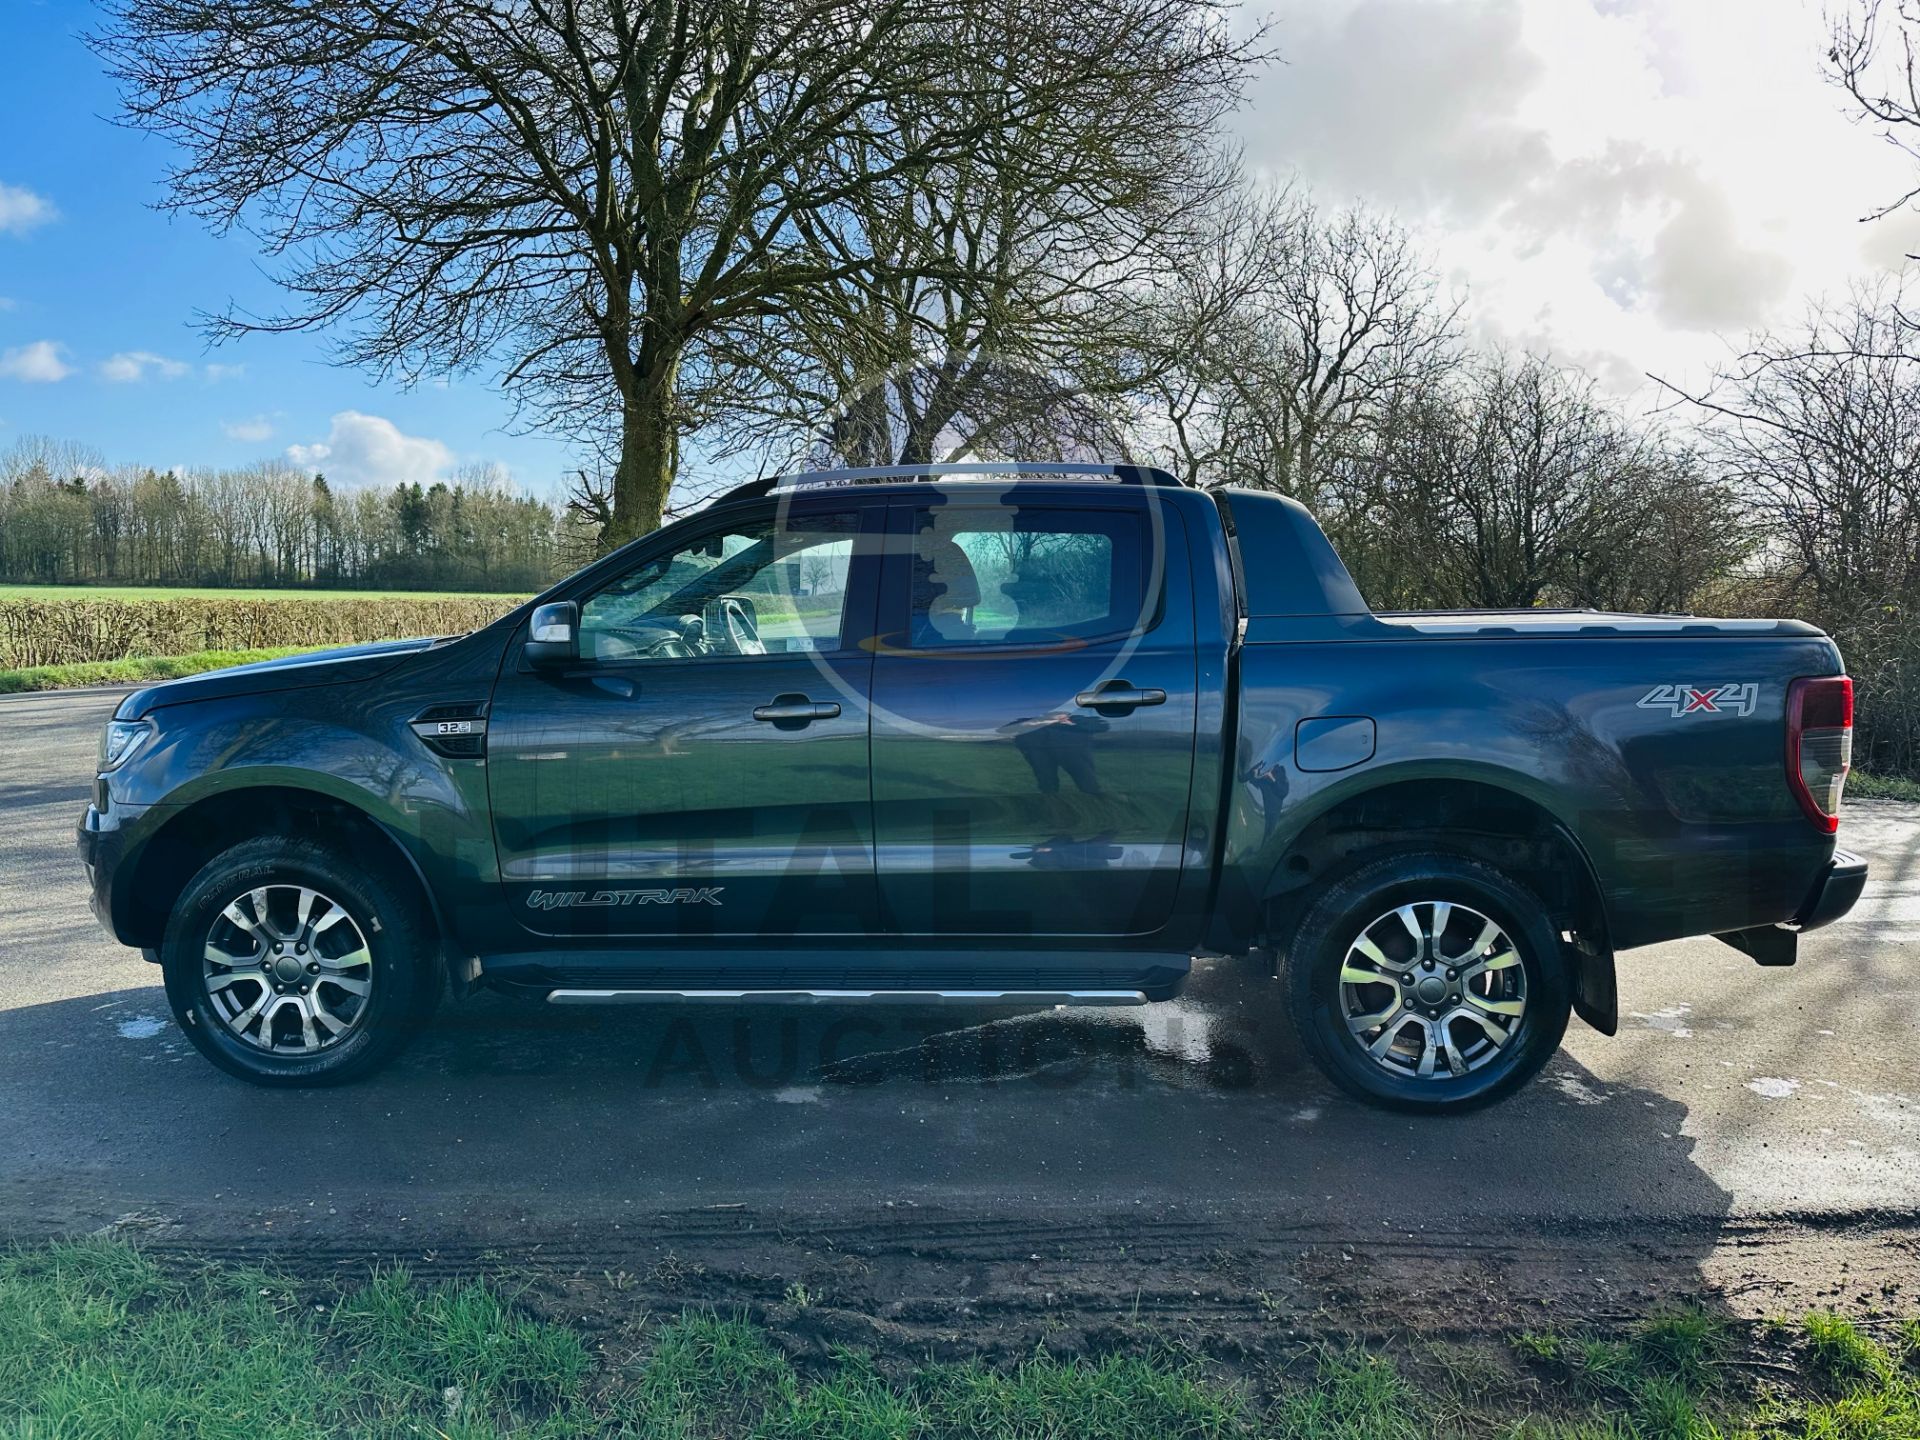 FORD RANGER *WILDTRAK EDITION* DOUBLE CAB PICK-UP (2018 - EURO 6) 3.2 TDCI - AUTOMATIC (1 OWNER) - Image 6 of 37